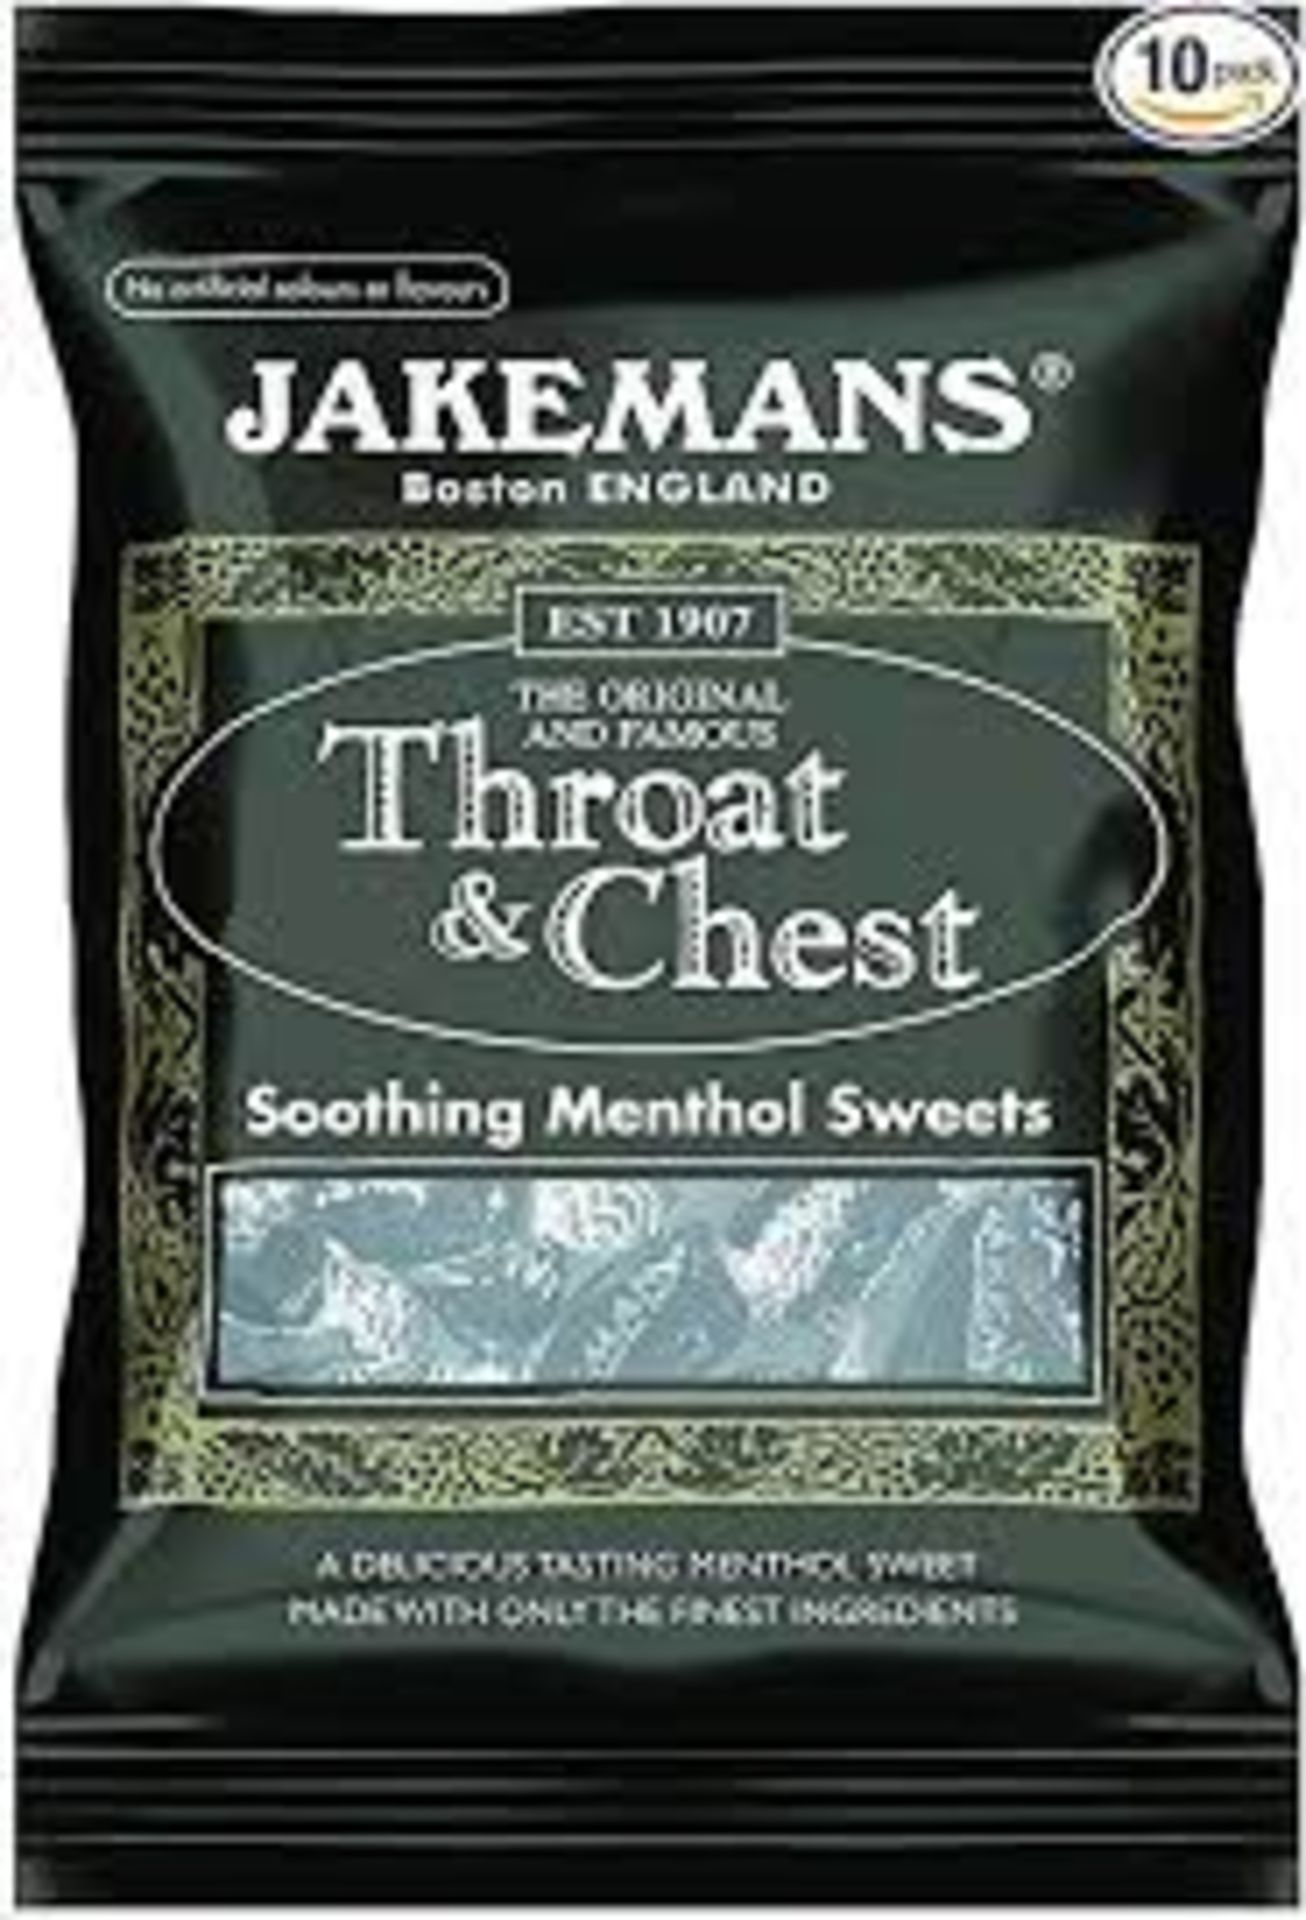 10 X BRAND NEW PACKS OF 10 100G JAKEMANS THROAT AND CHEST SOOTHING SWEETS EXP 31/8/22 PW